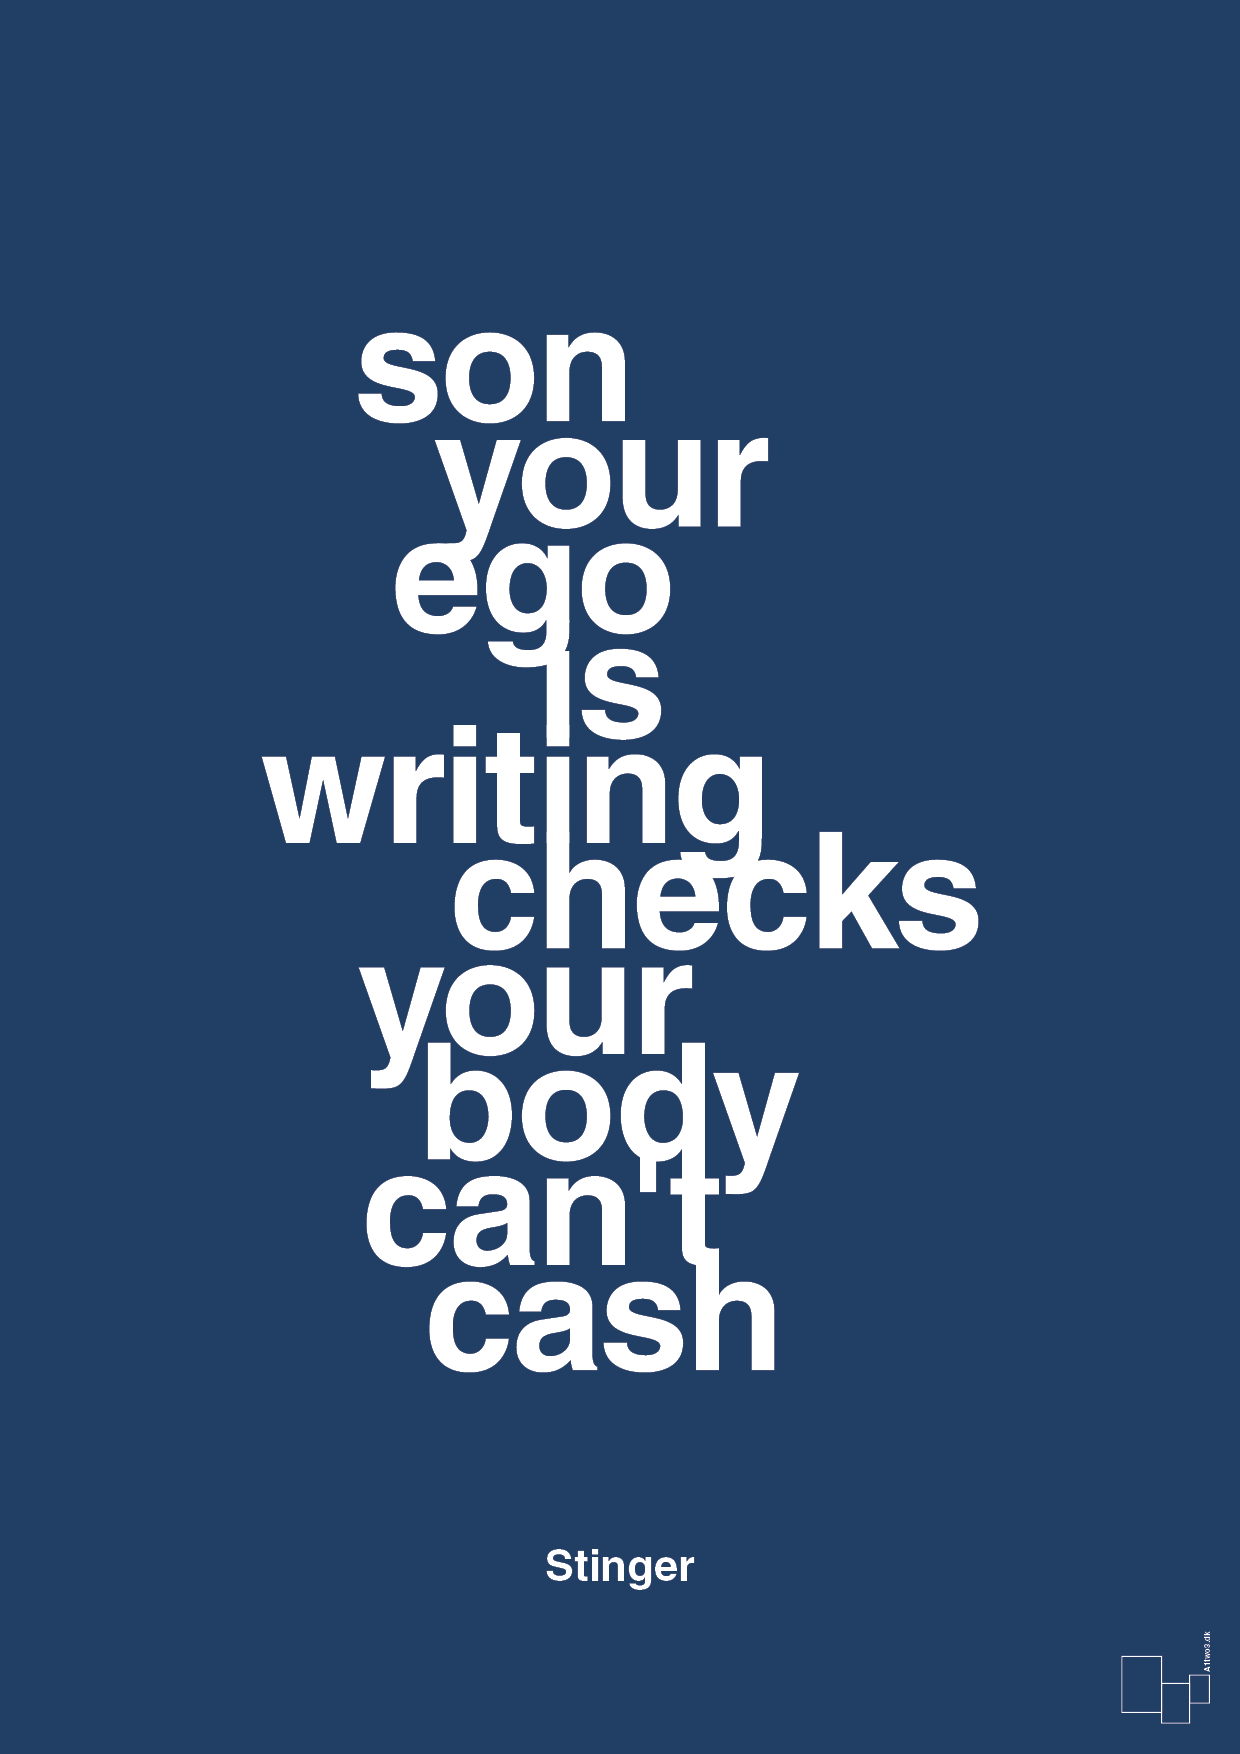 son your ego is writing checks your body can't cash - Plakat med Citater i Lapis Blue